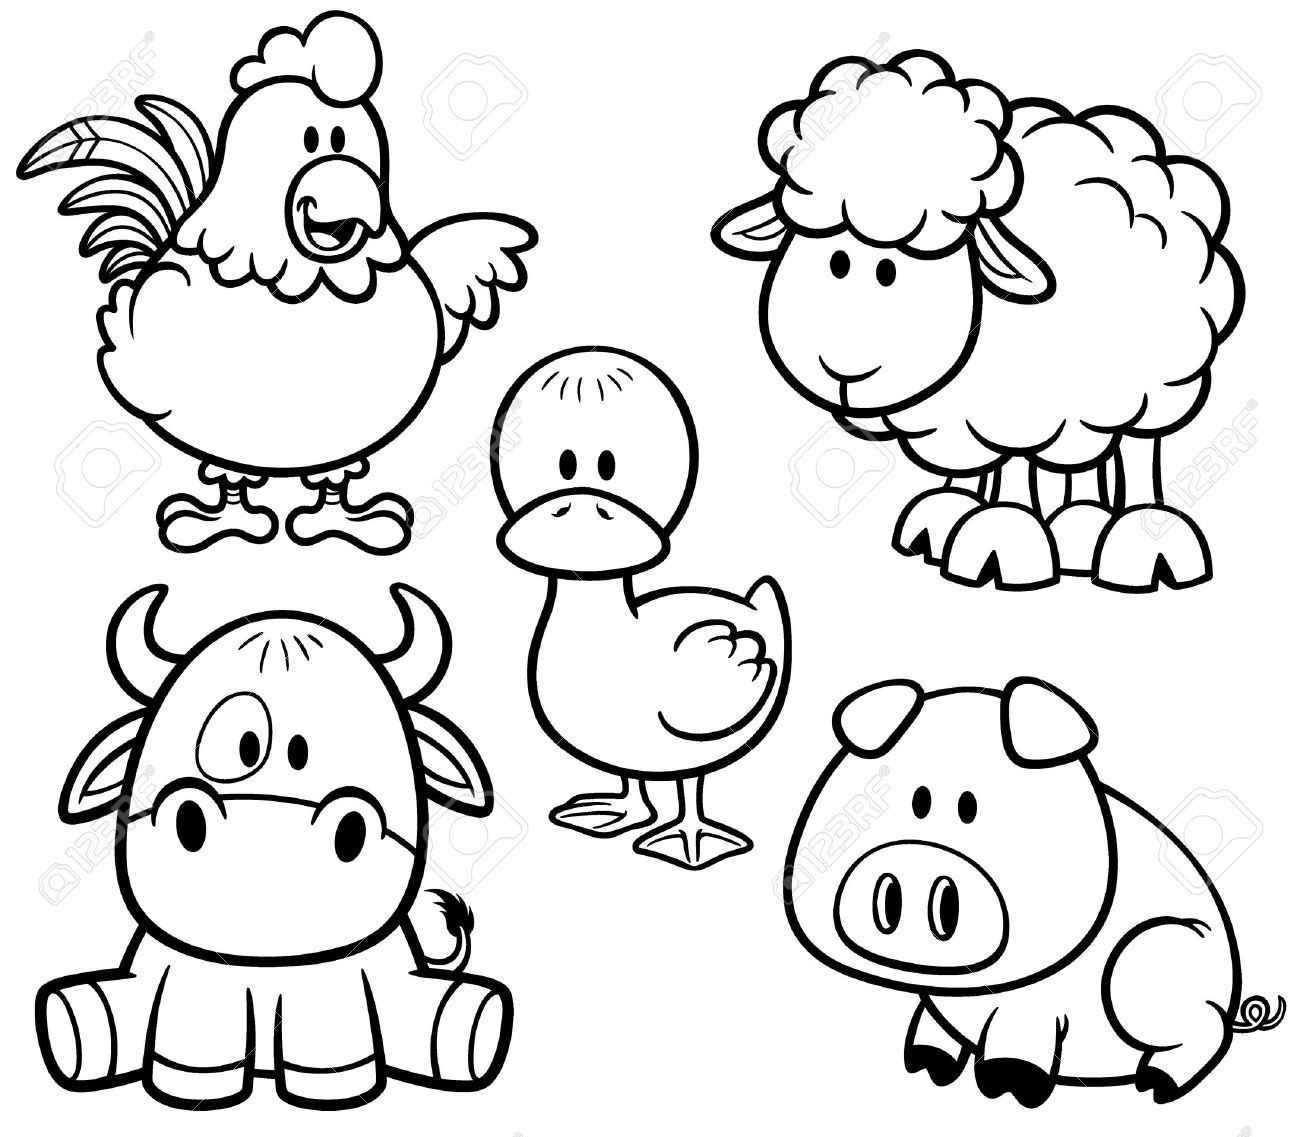 Baby Farm Animal Coloring Pages
 Easy Farm Animal Dot To Printable Sketch Coloring Page